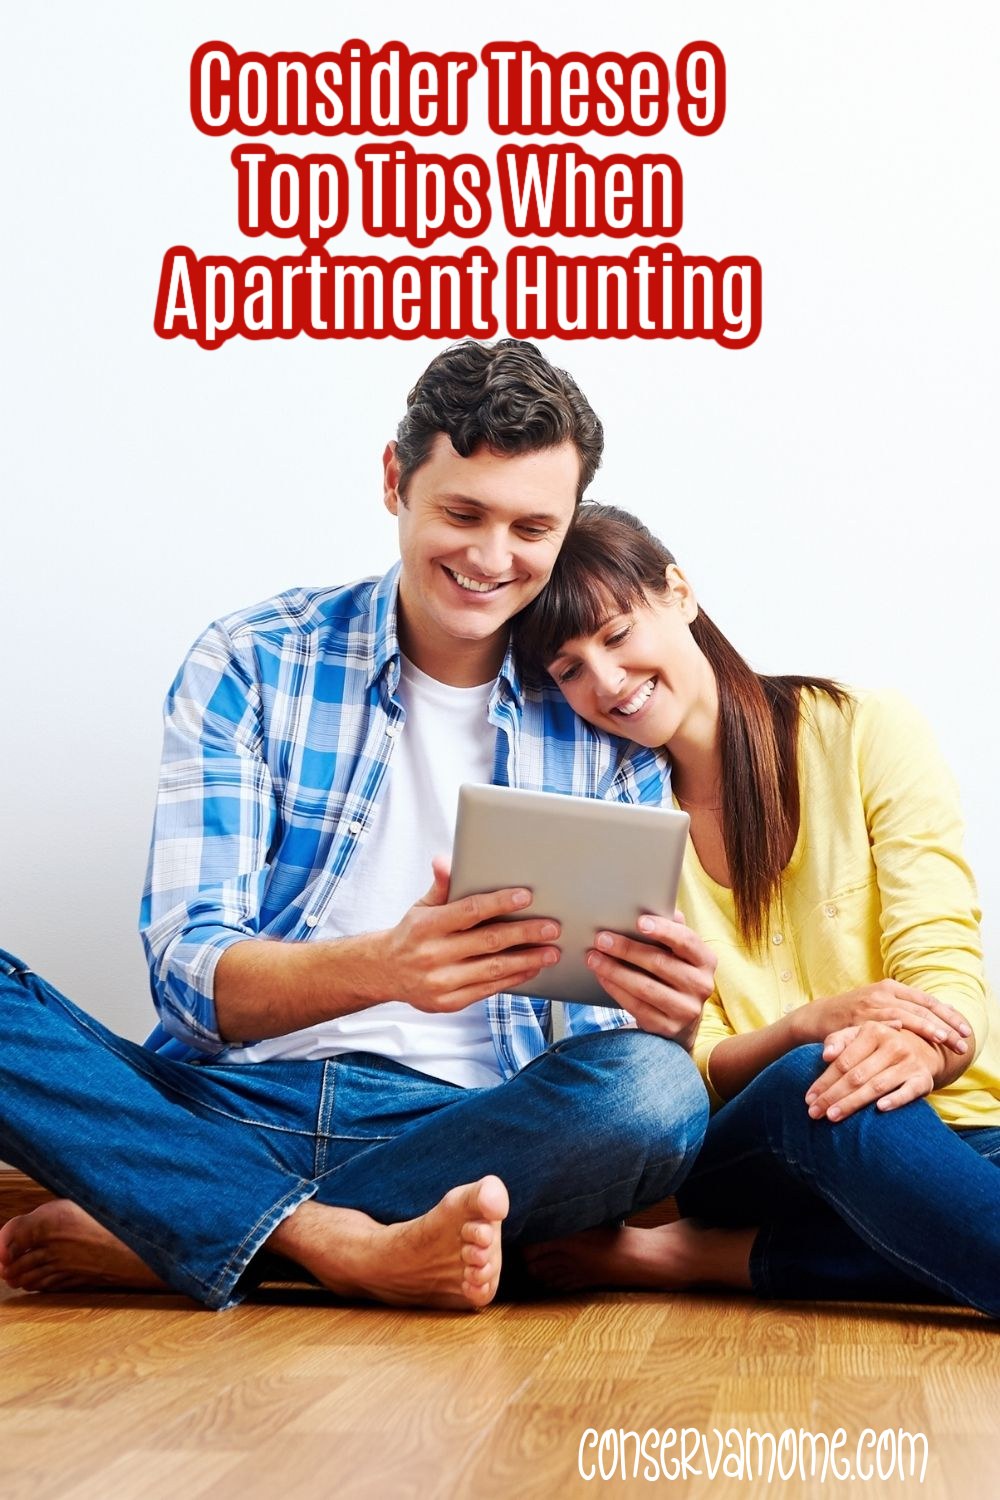 Top Tips When Apartment Hunting